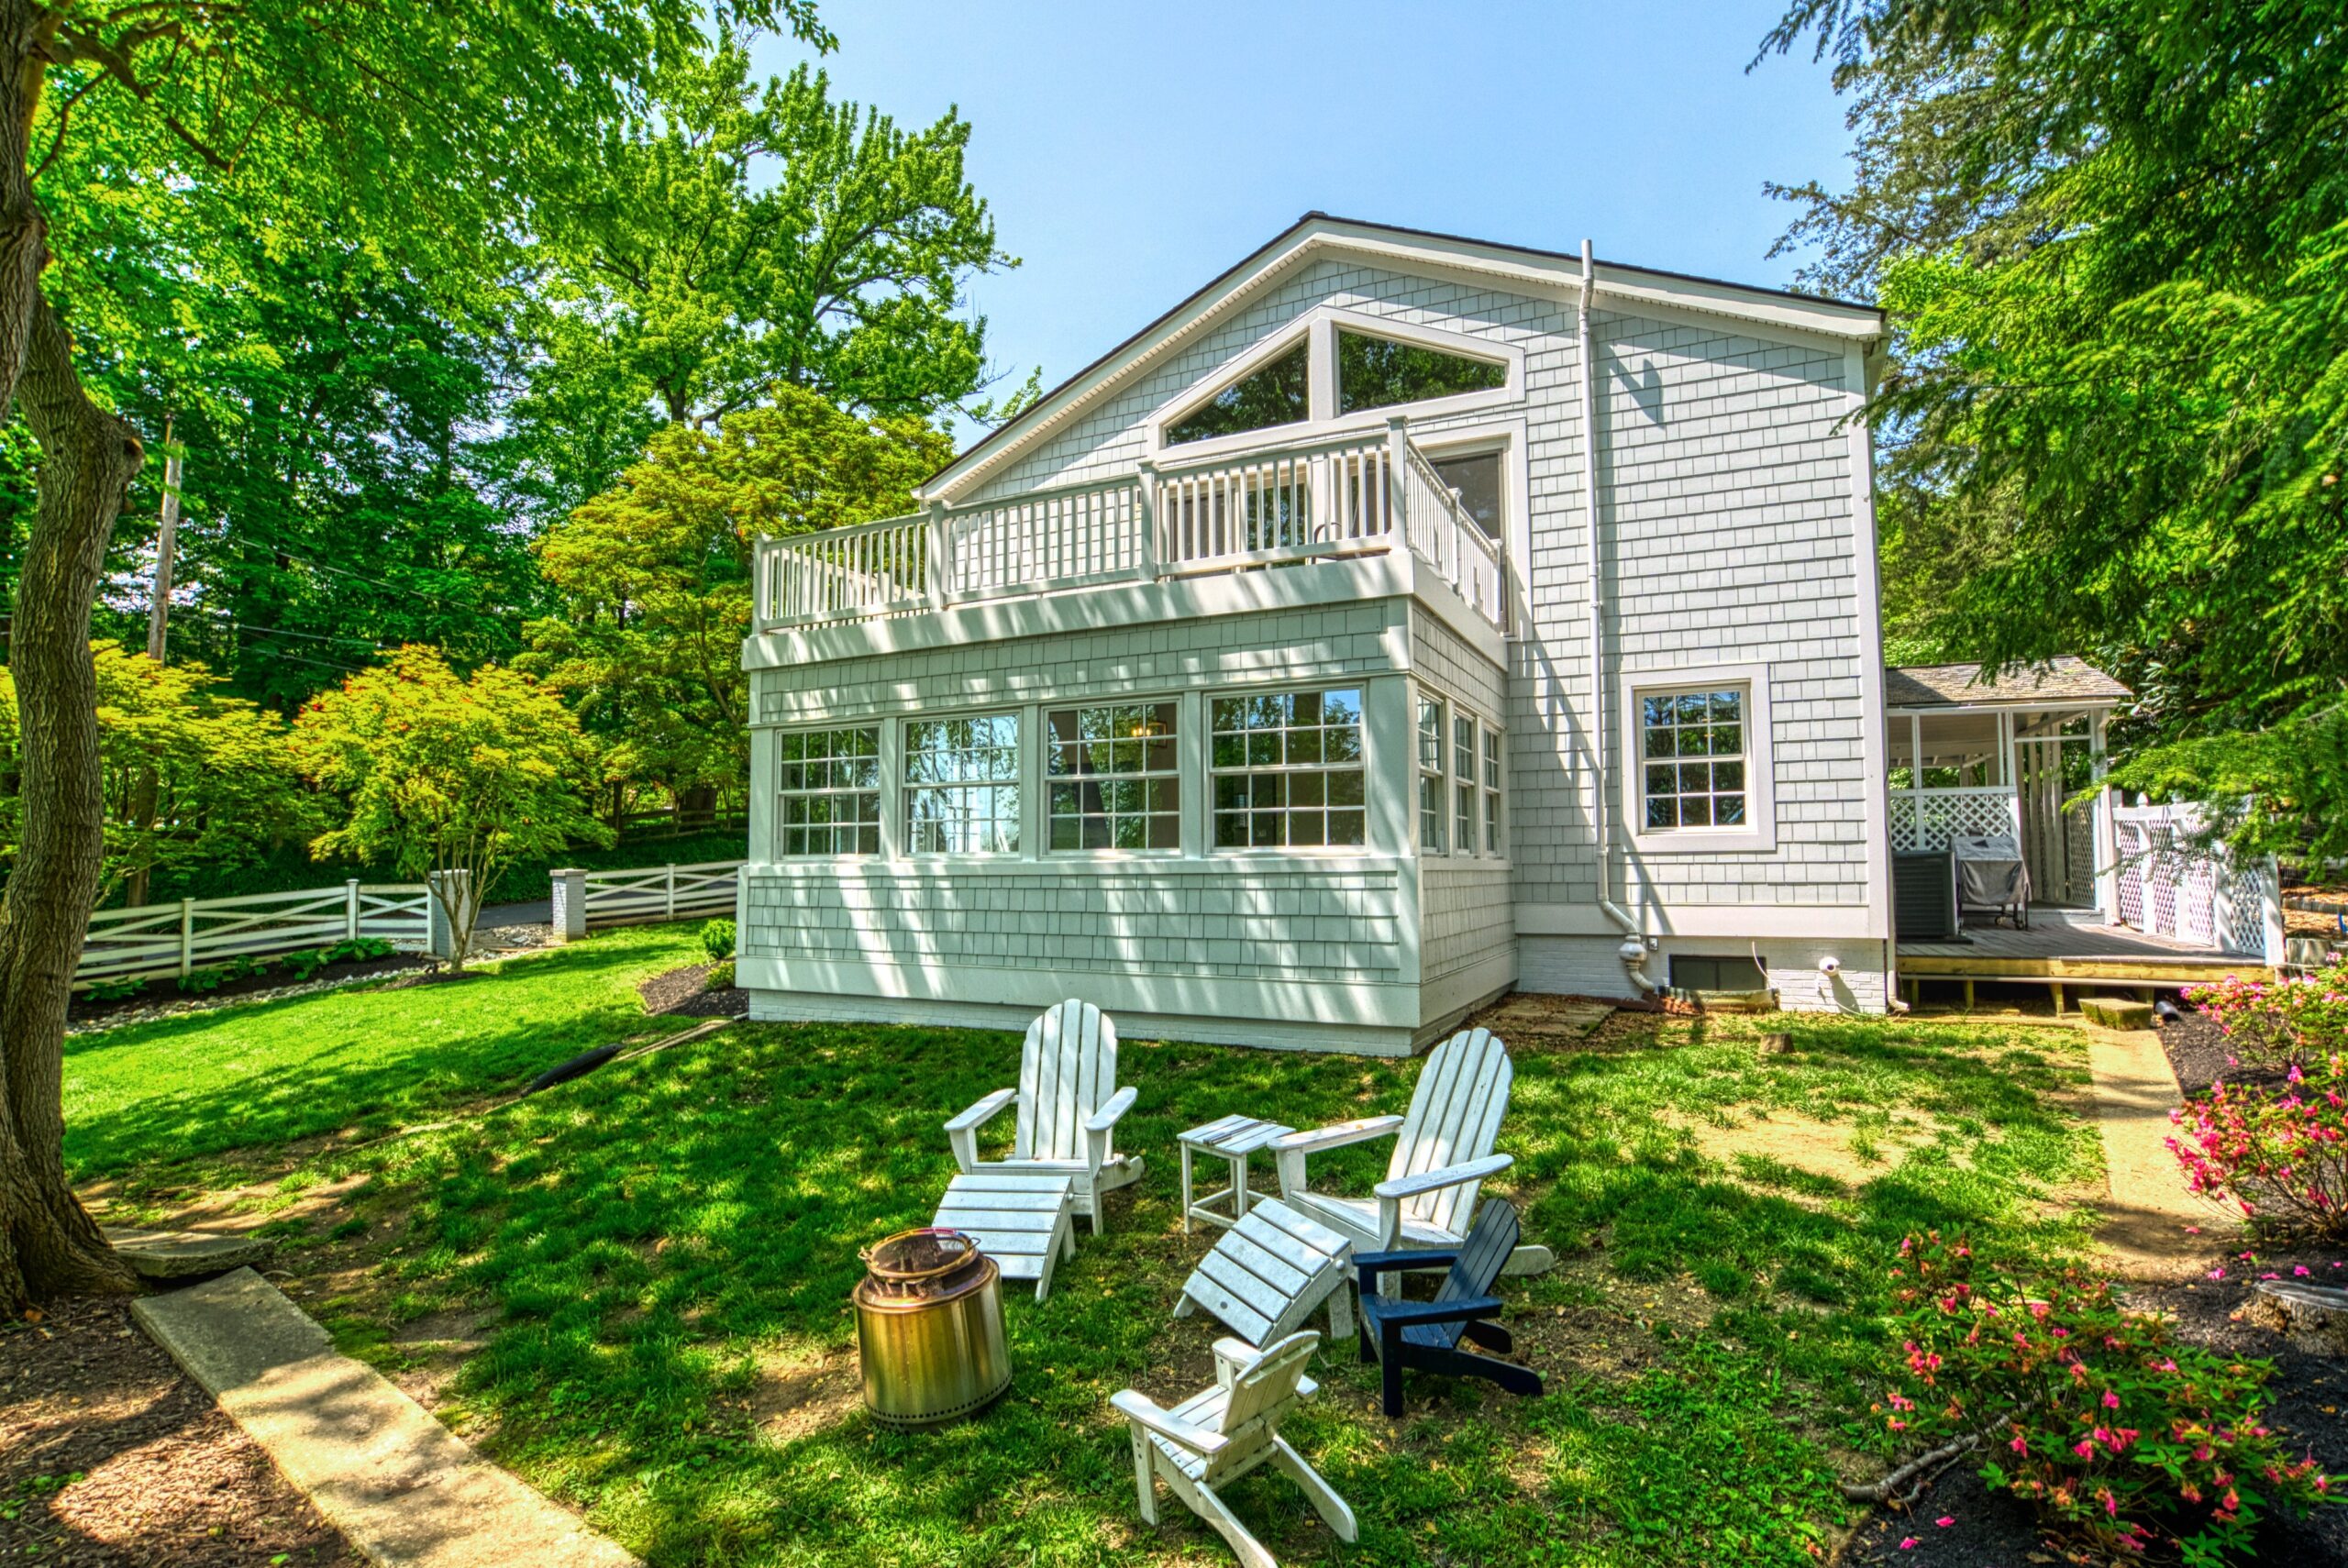 Professional exterior photo of 209 Norwood Road, Annapolis, MD - showing the yard outside of the sunroom with 3 lawn chairs